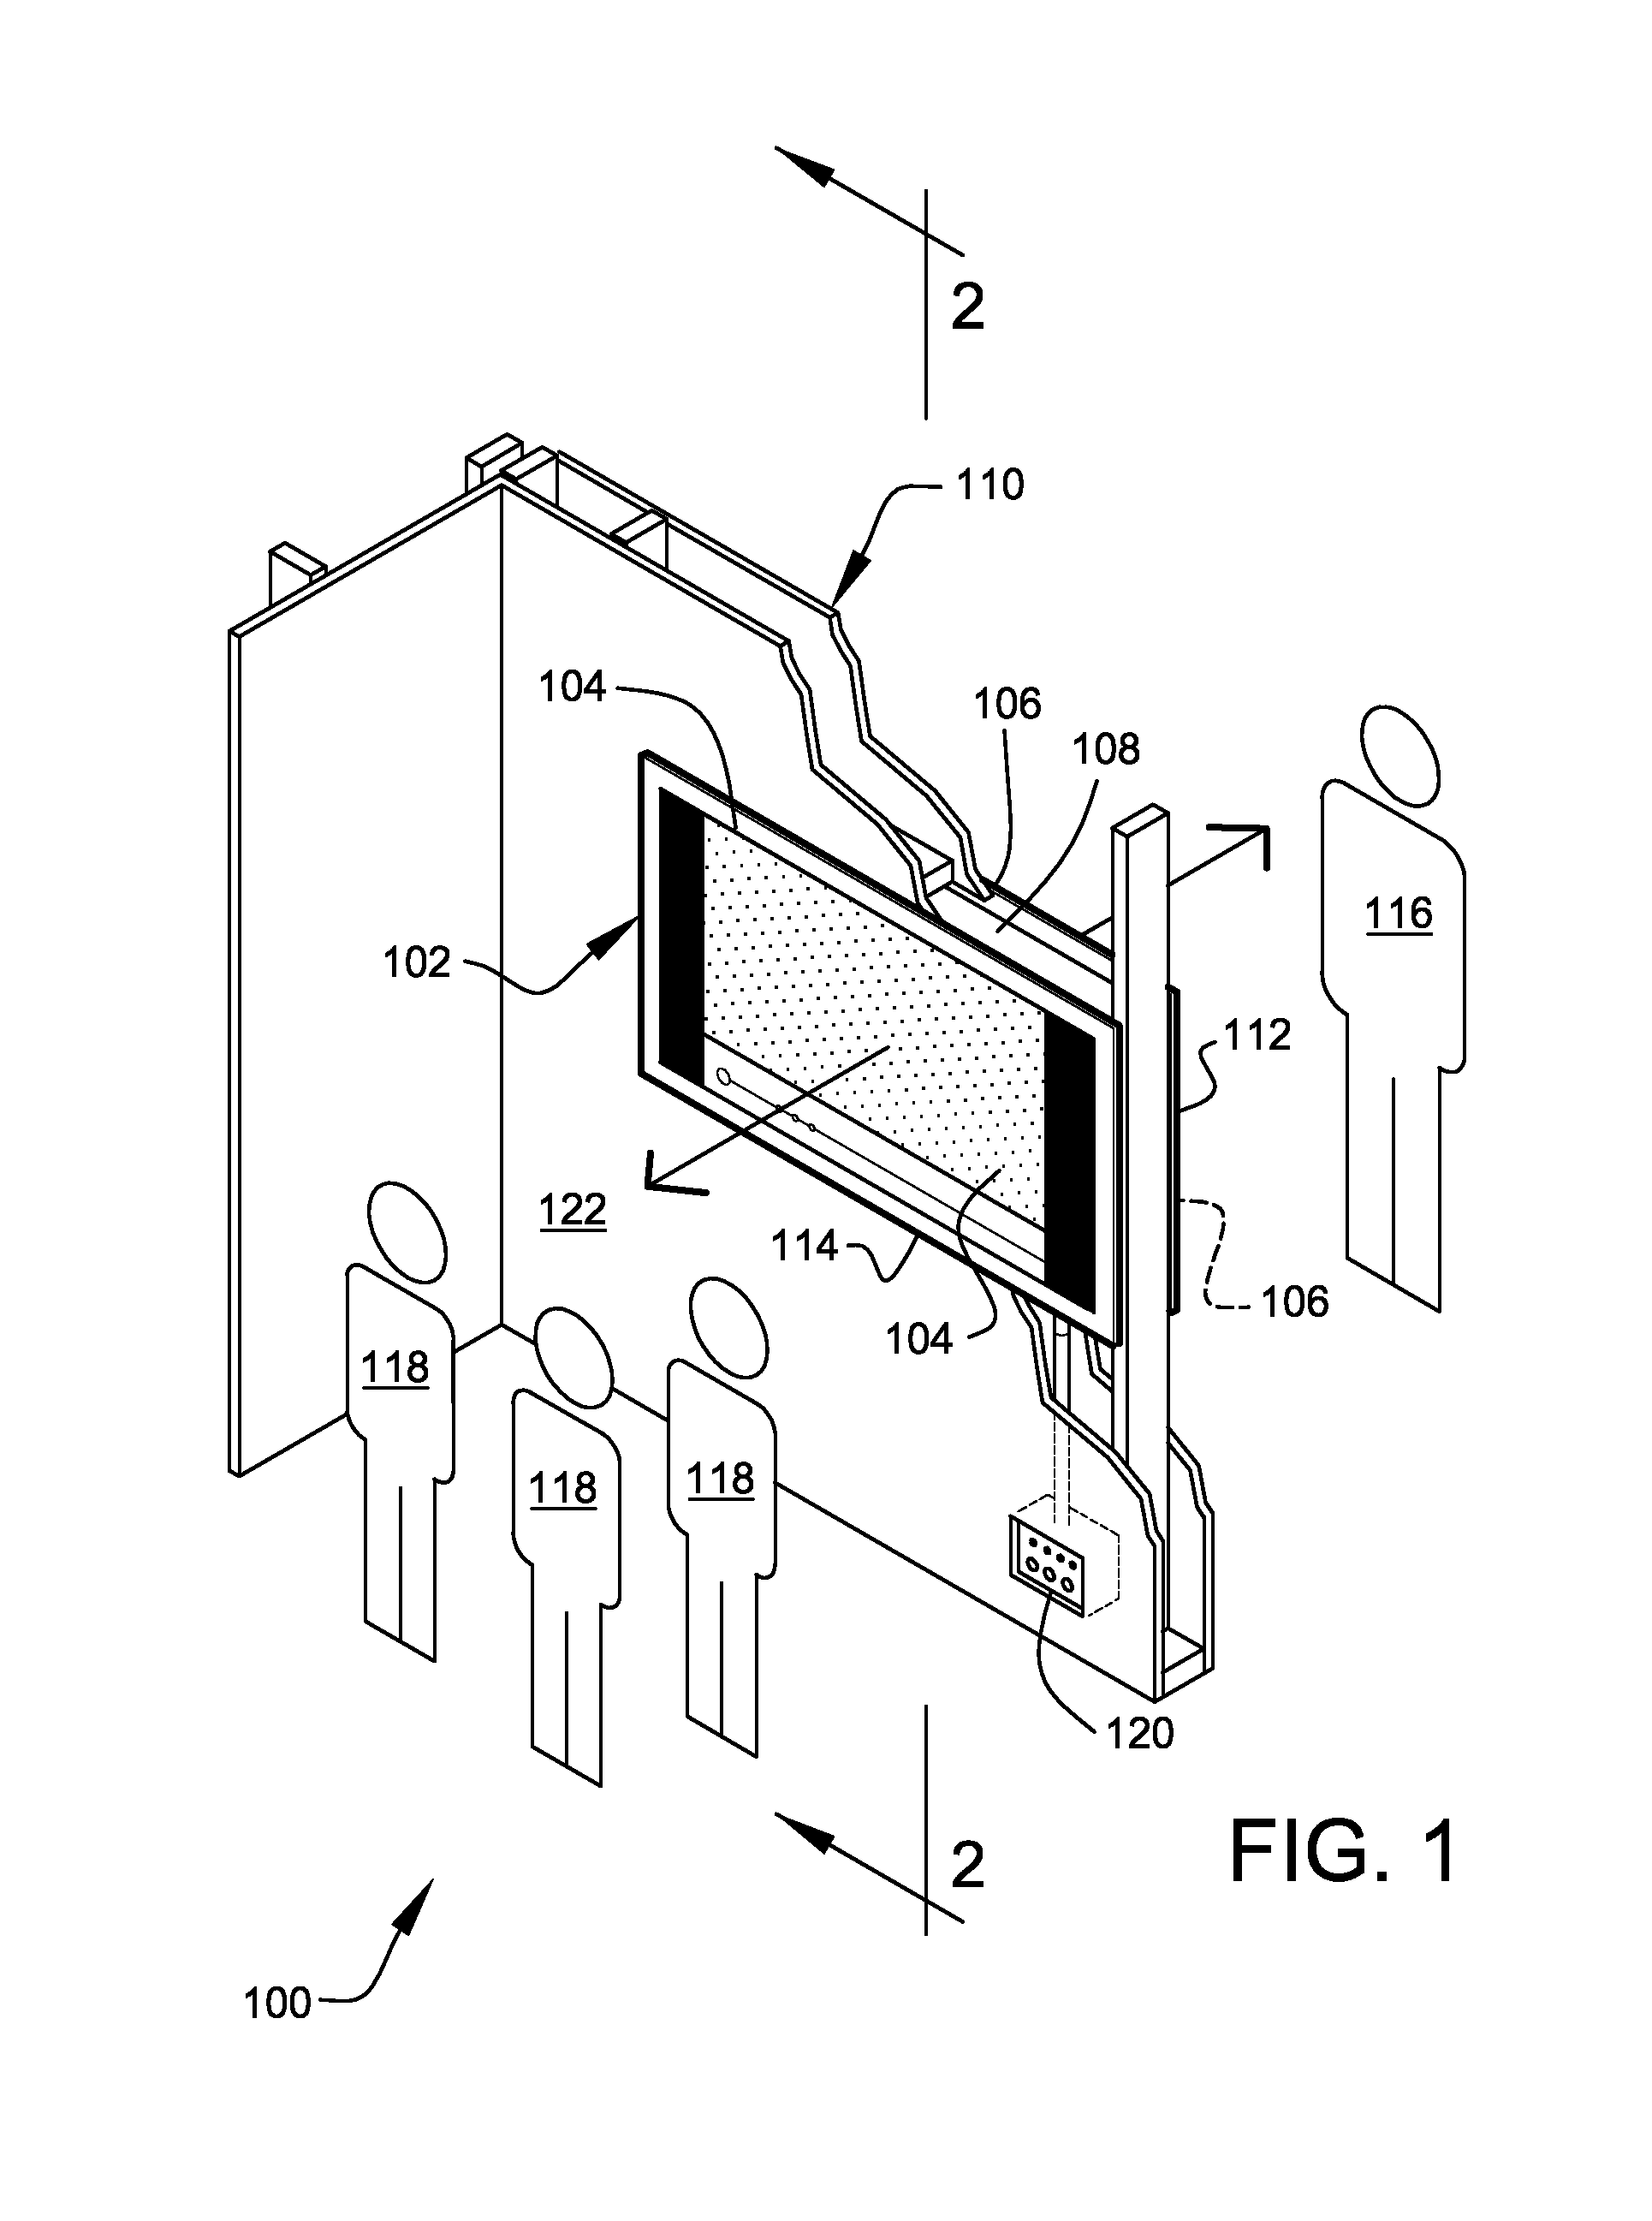 Electronic image display systems